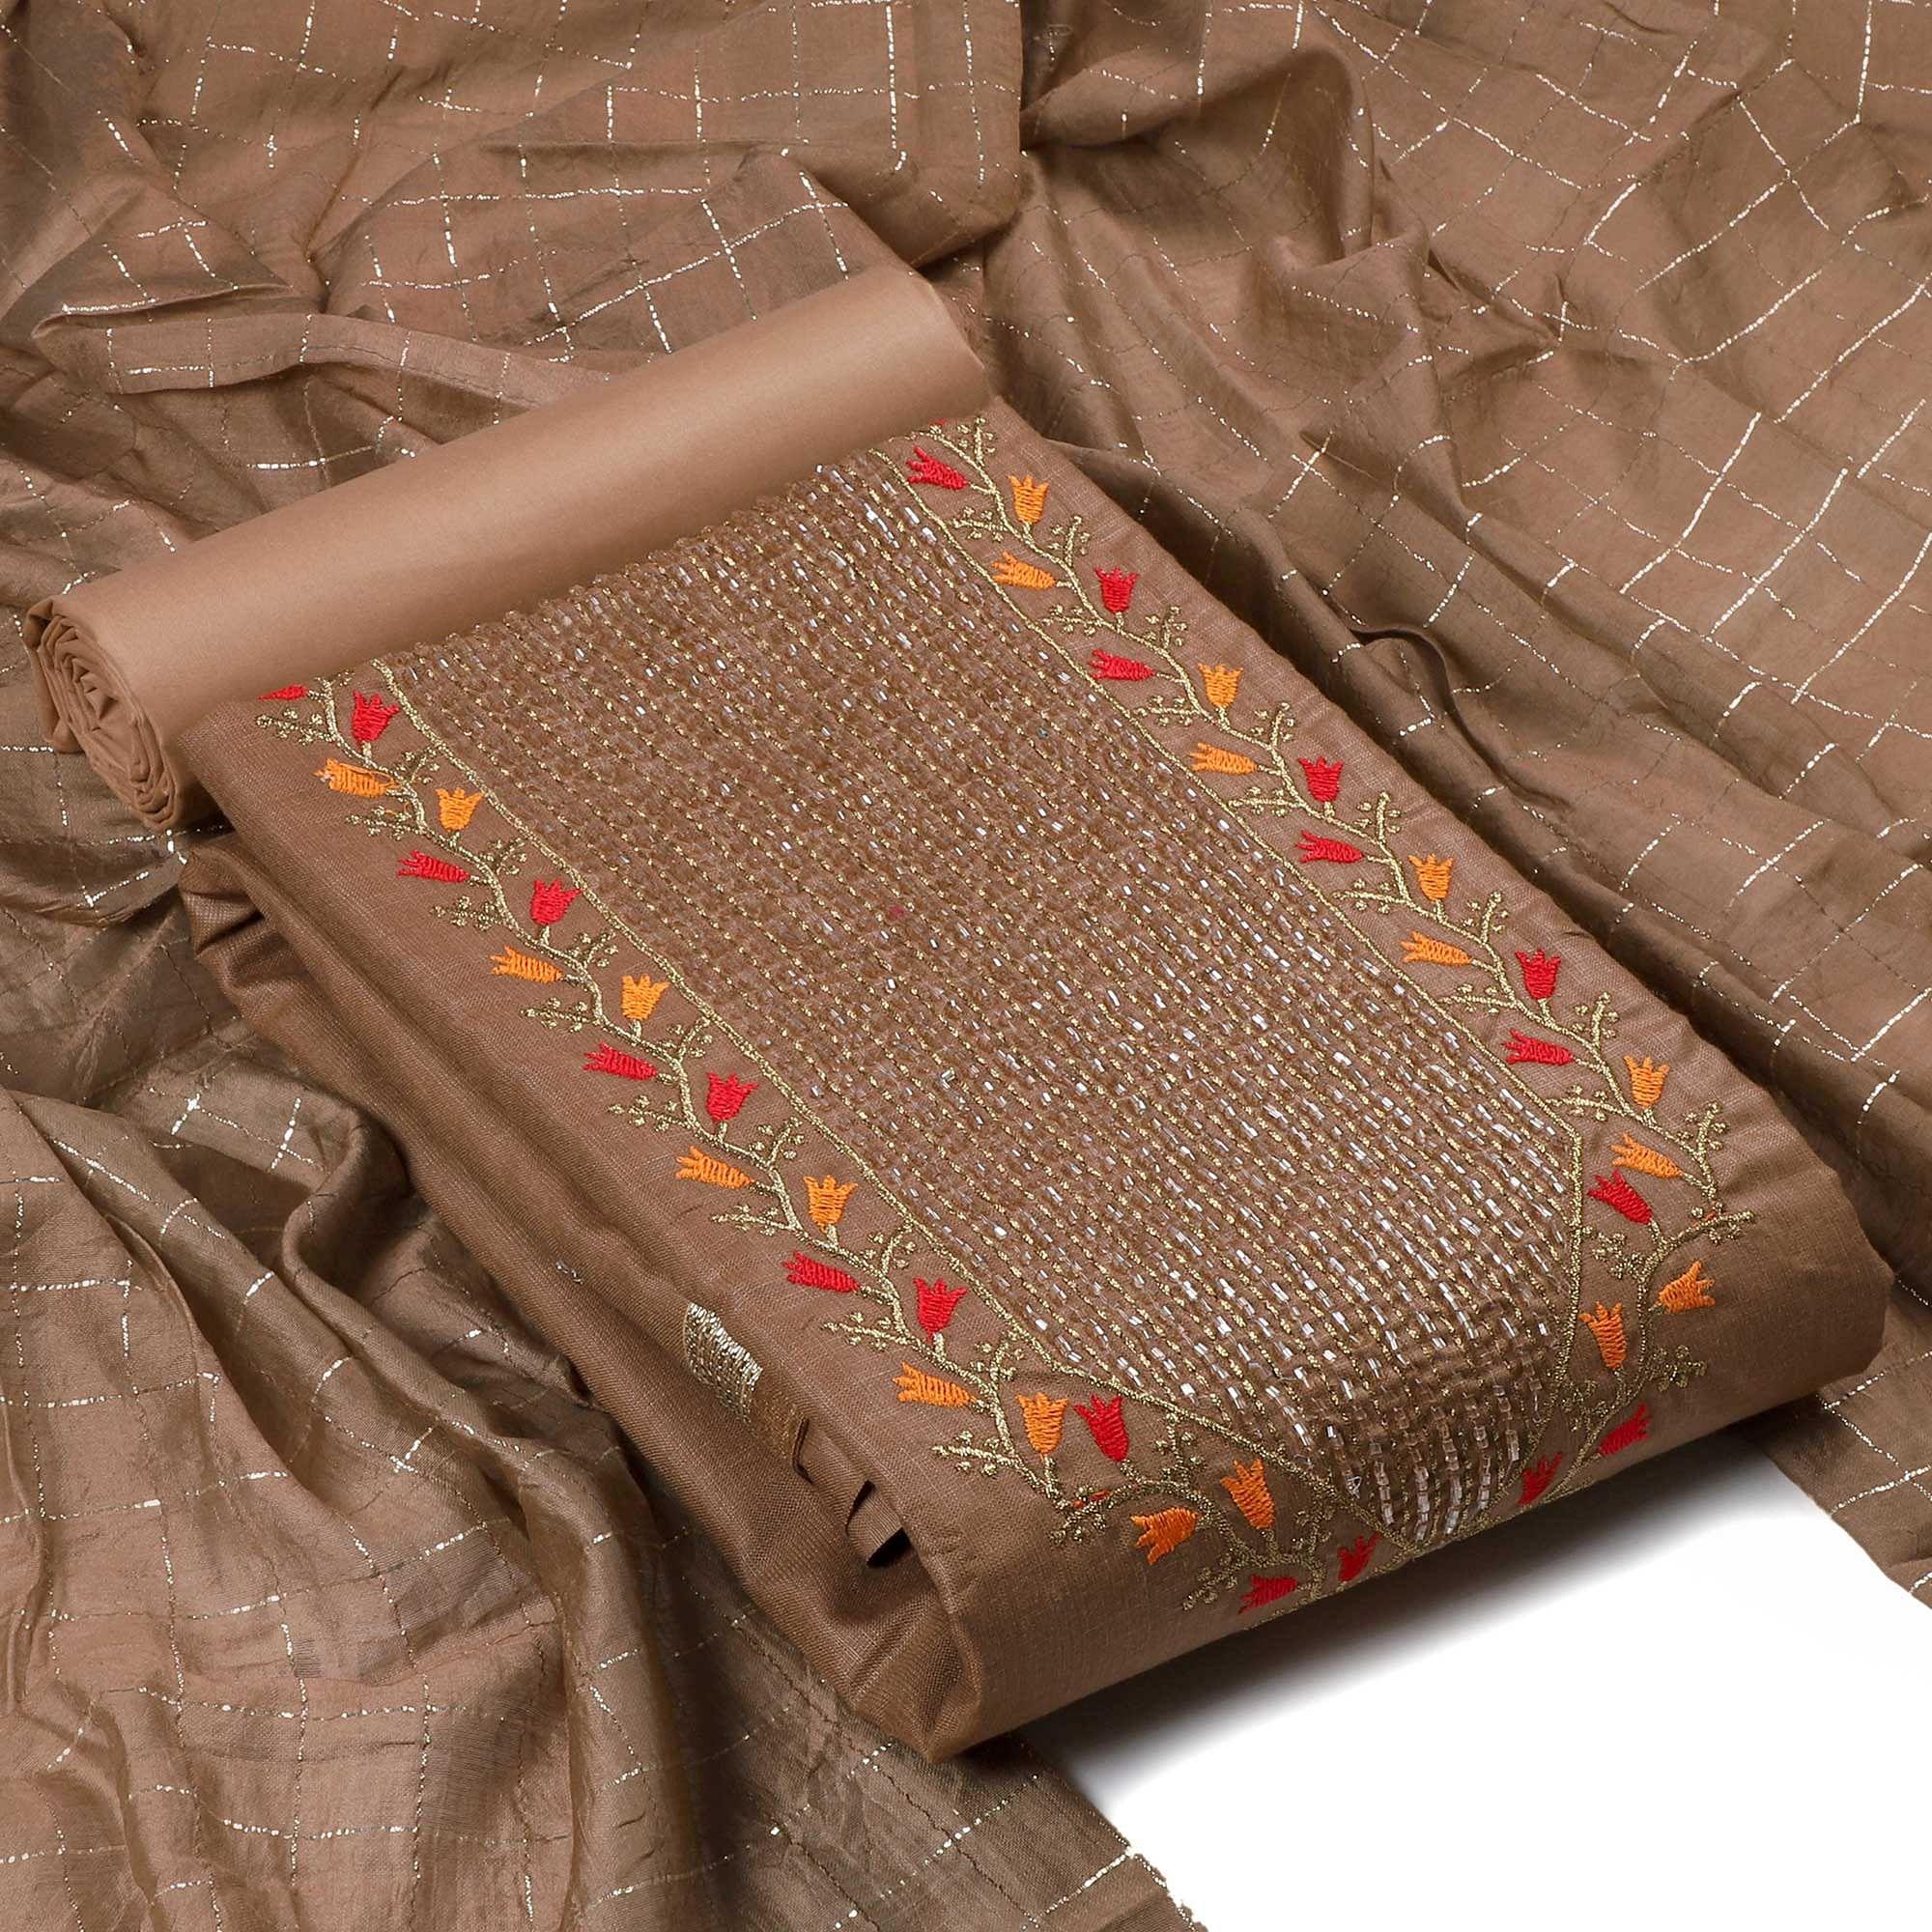 Brown Festive Wear Embroidered Cotton Dress Material - Peachmode